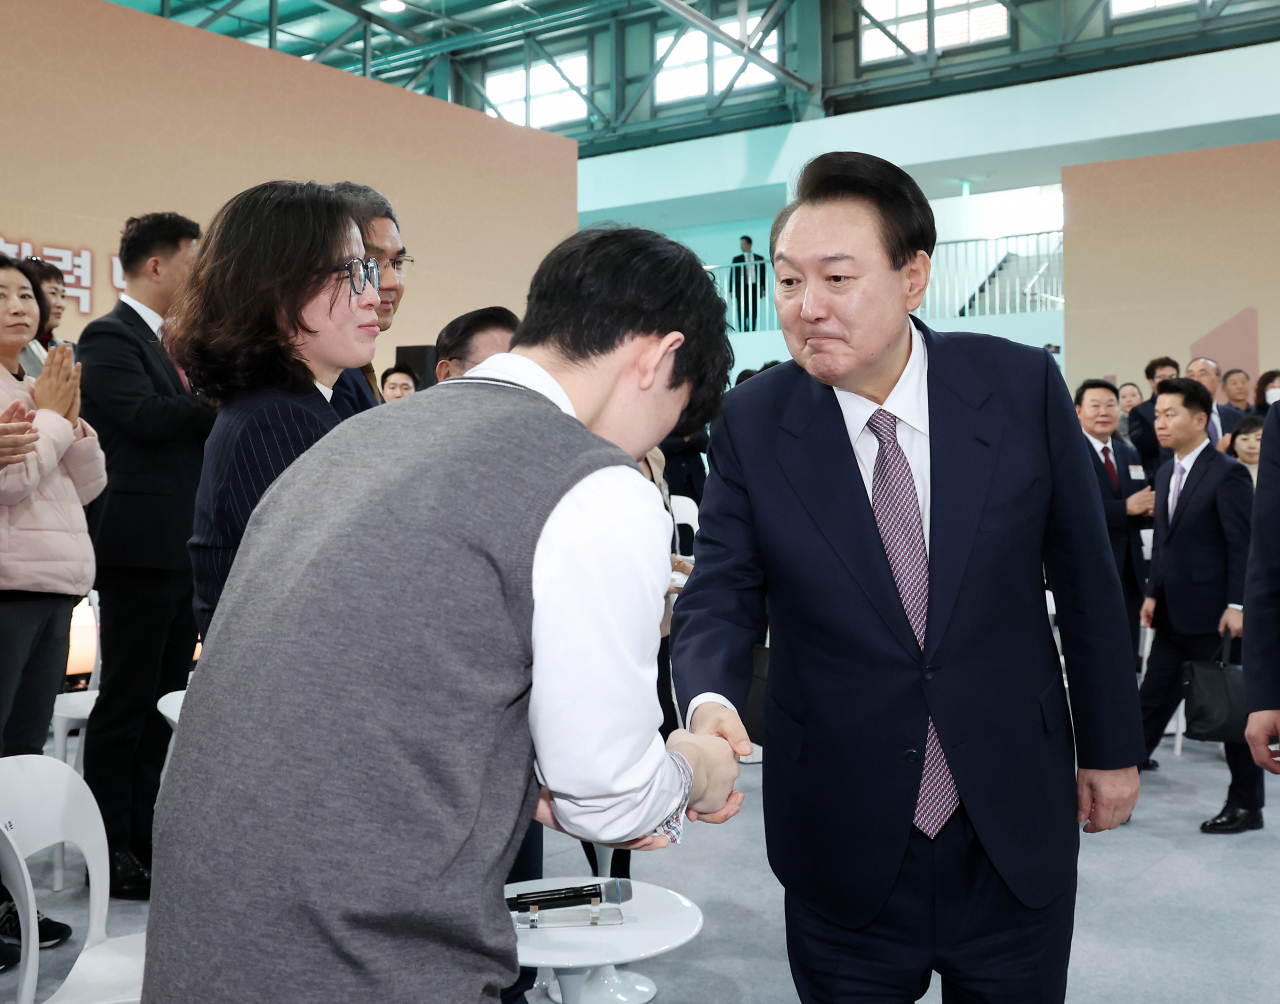 President Yoon Suk Yeol (right) shakes hand with a participant in a policy debate held at Seosan Air Base in Seosan, South Chungcheong Province, on Monday, (Pool photo via Yonhap)